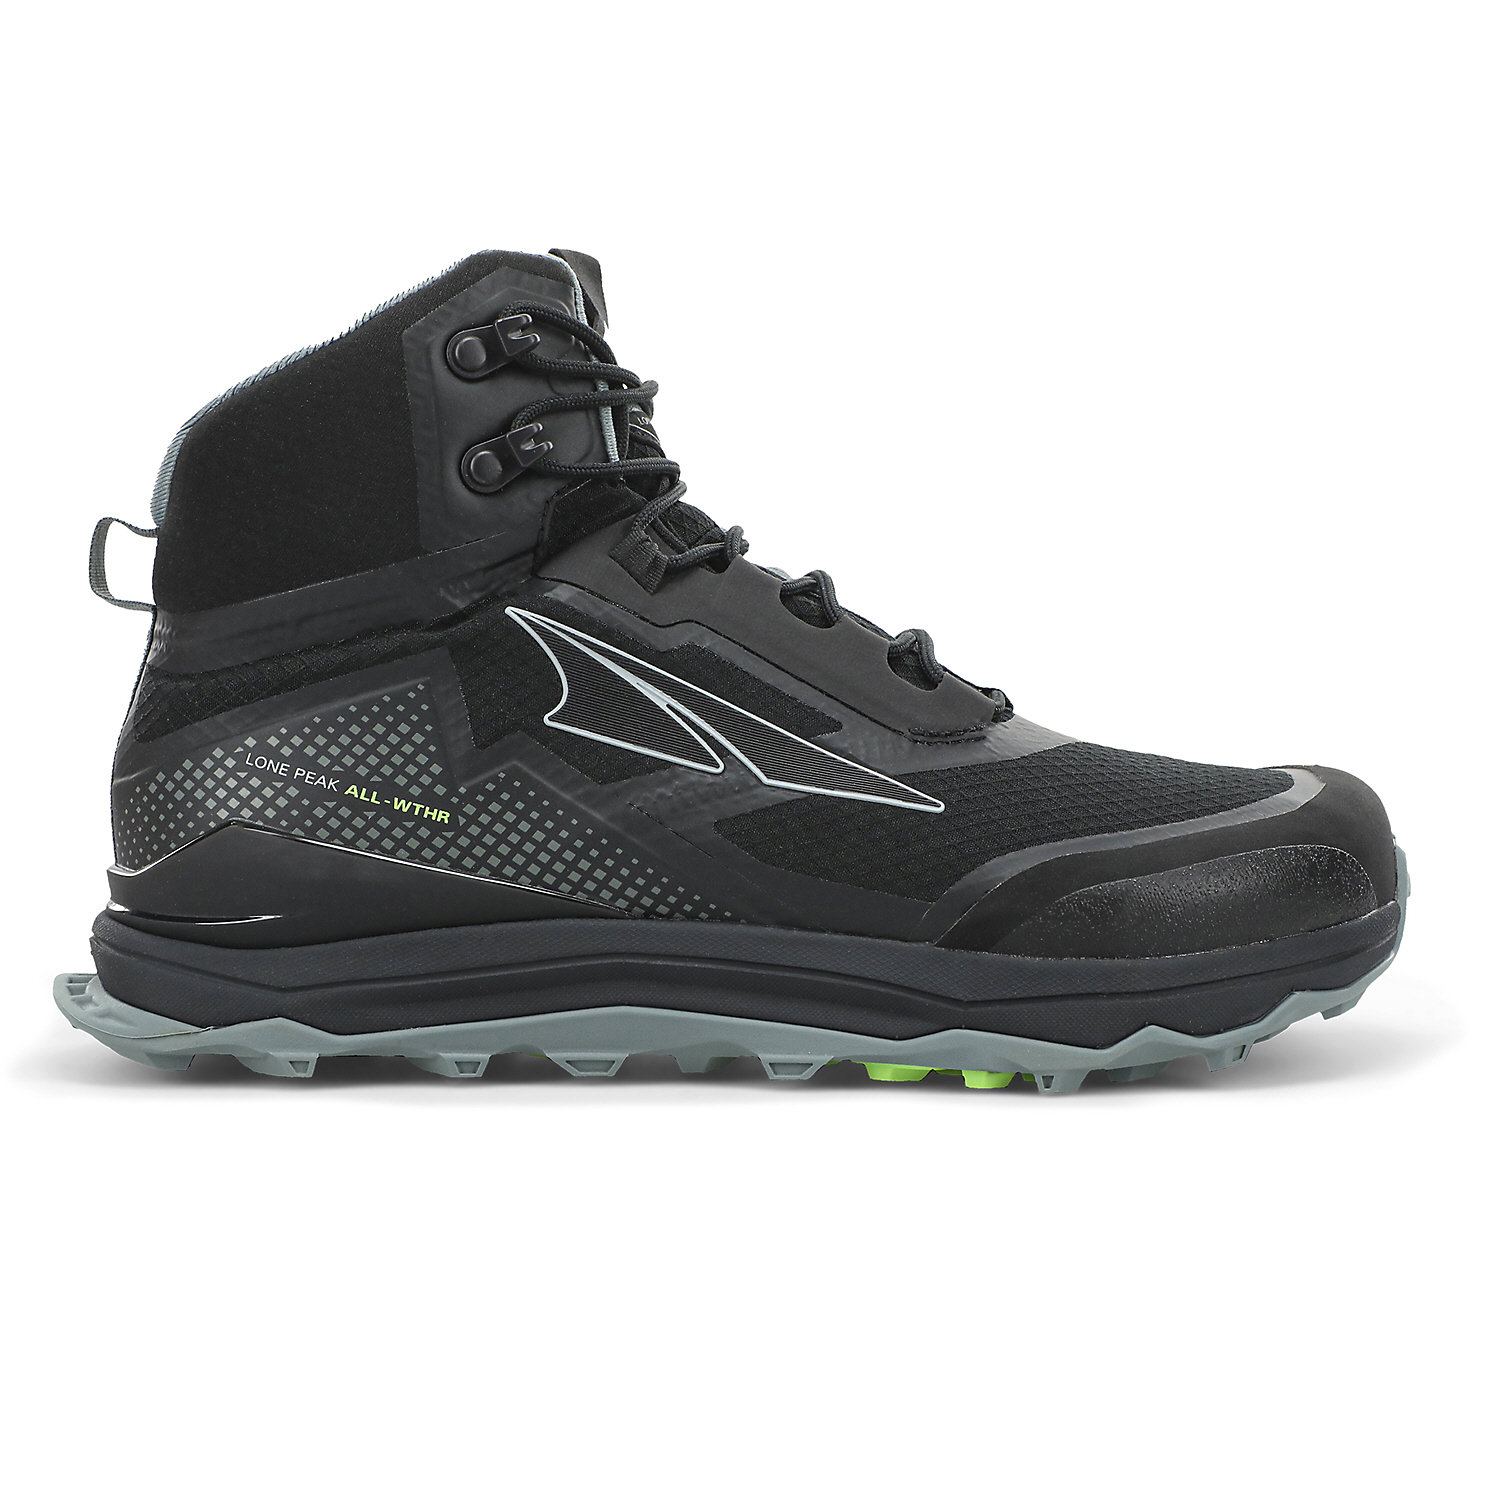 Altra Womens Lone Peak All Weather Mid Shoe